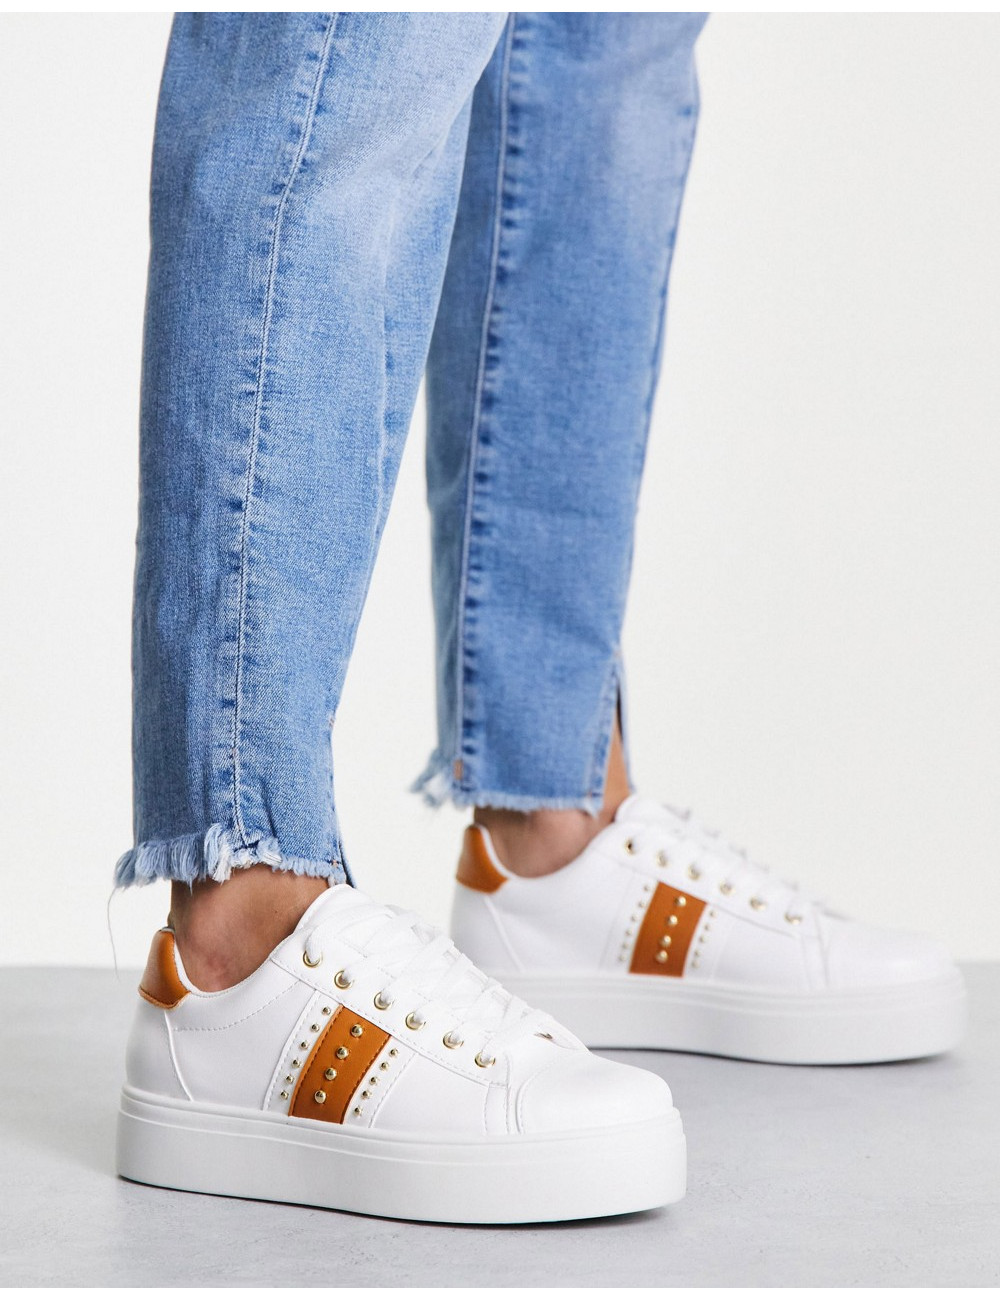 Topshop Clementine studded...